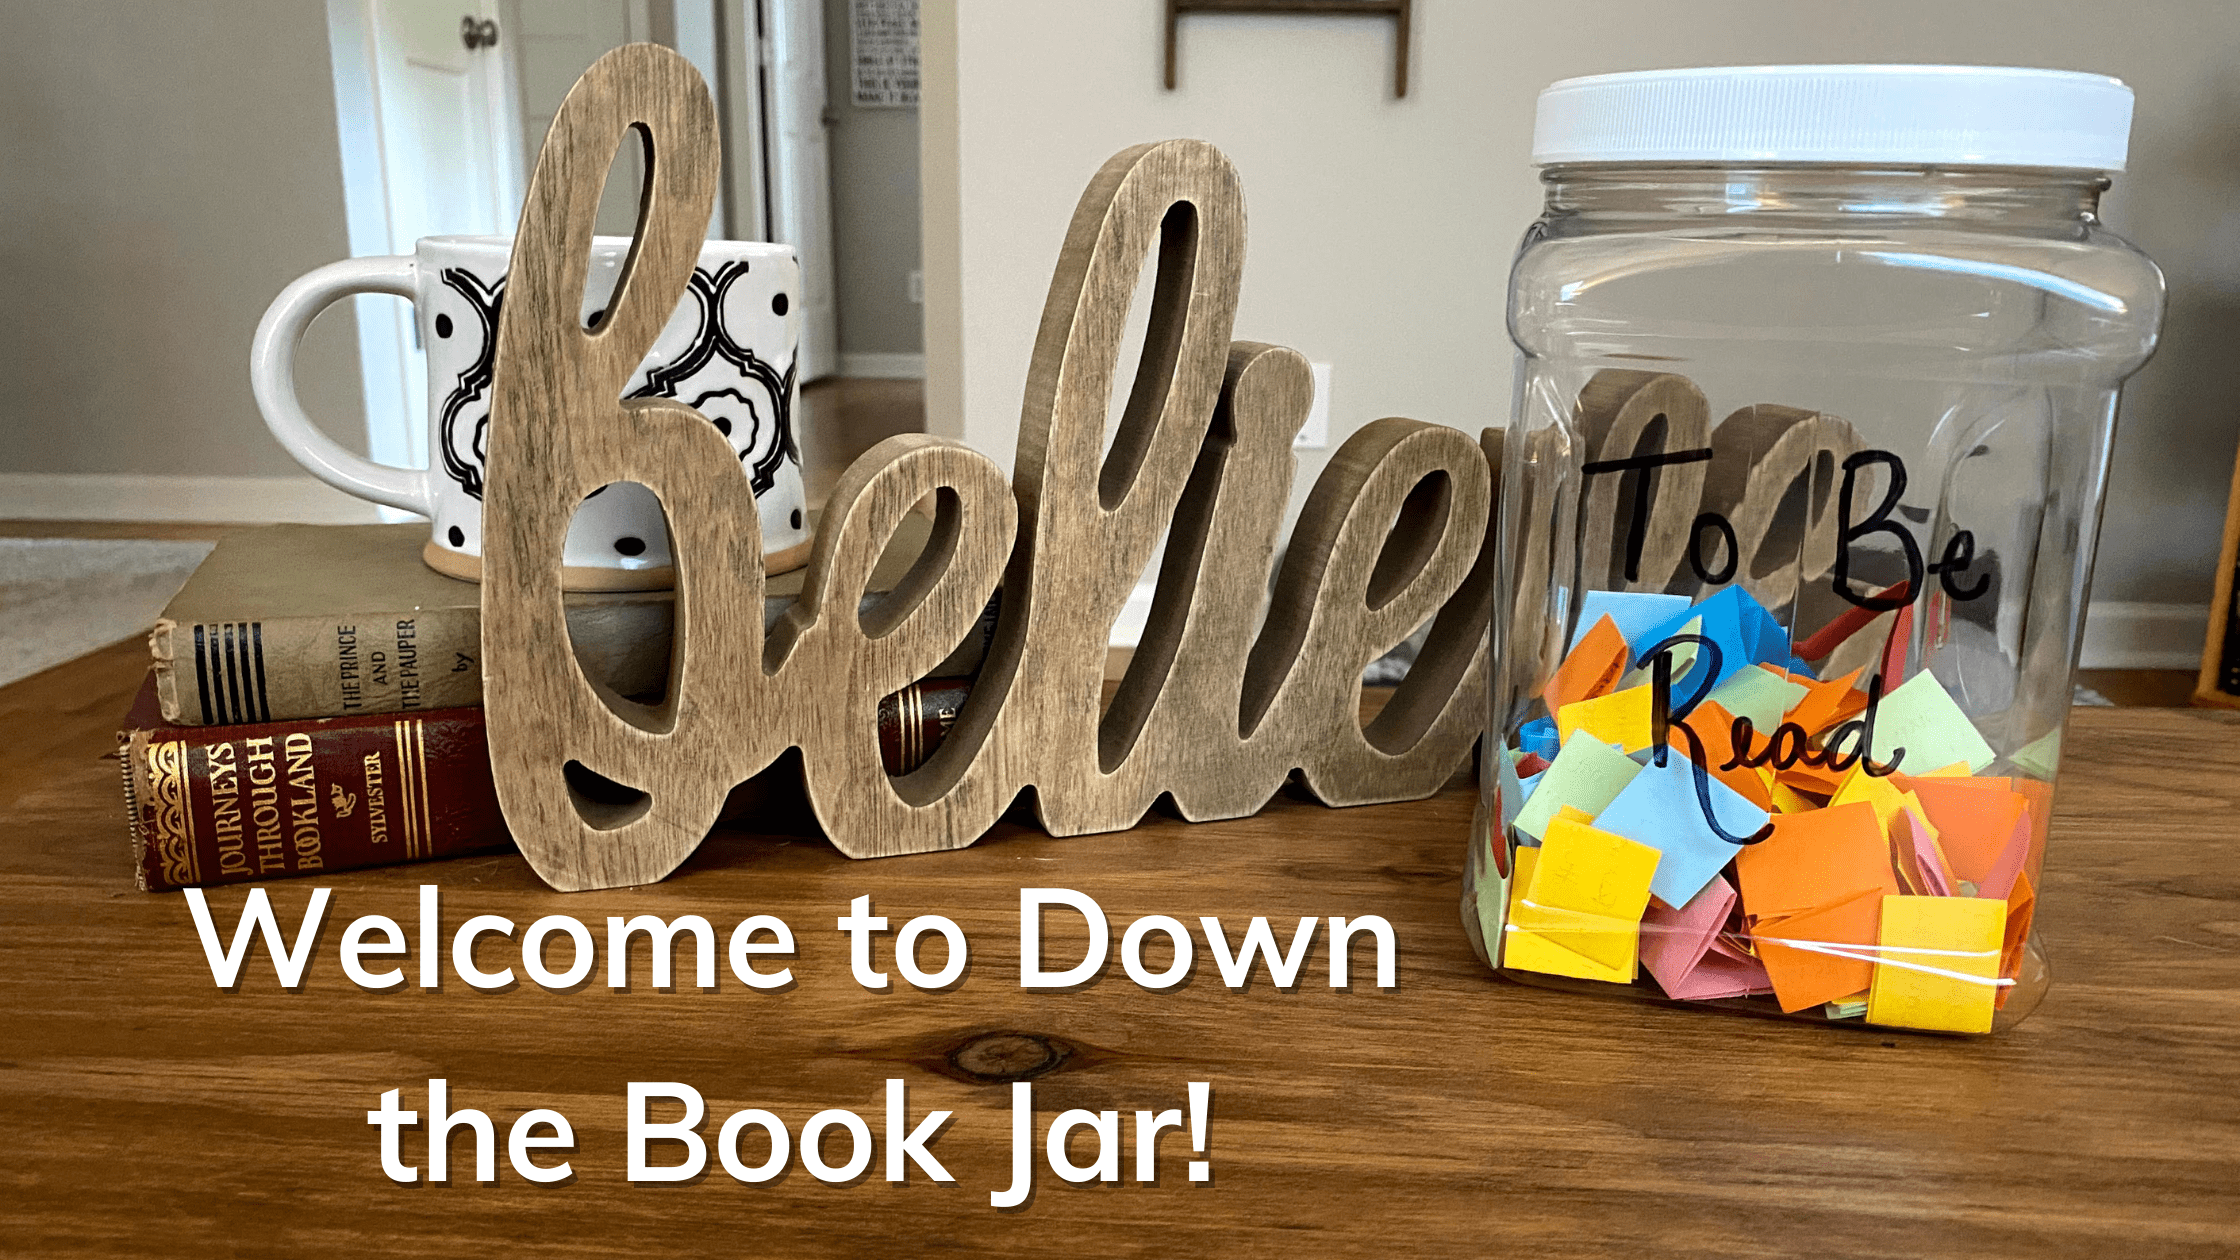 Welcome to Down the Book Jar!